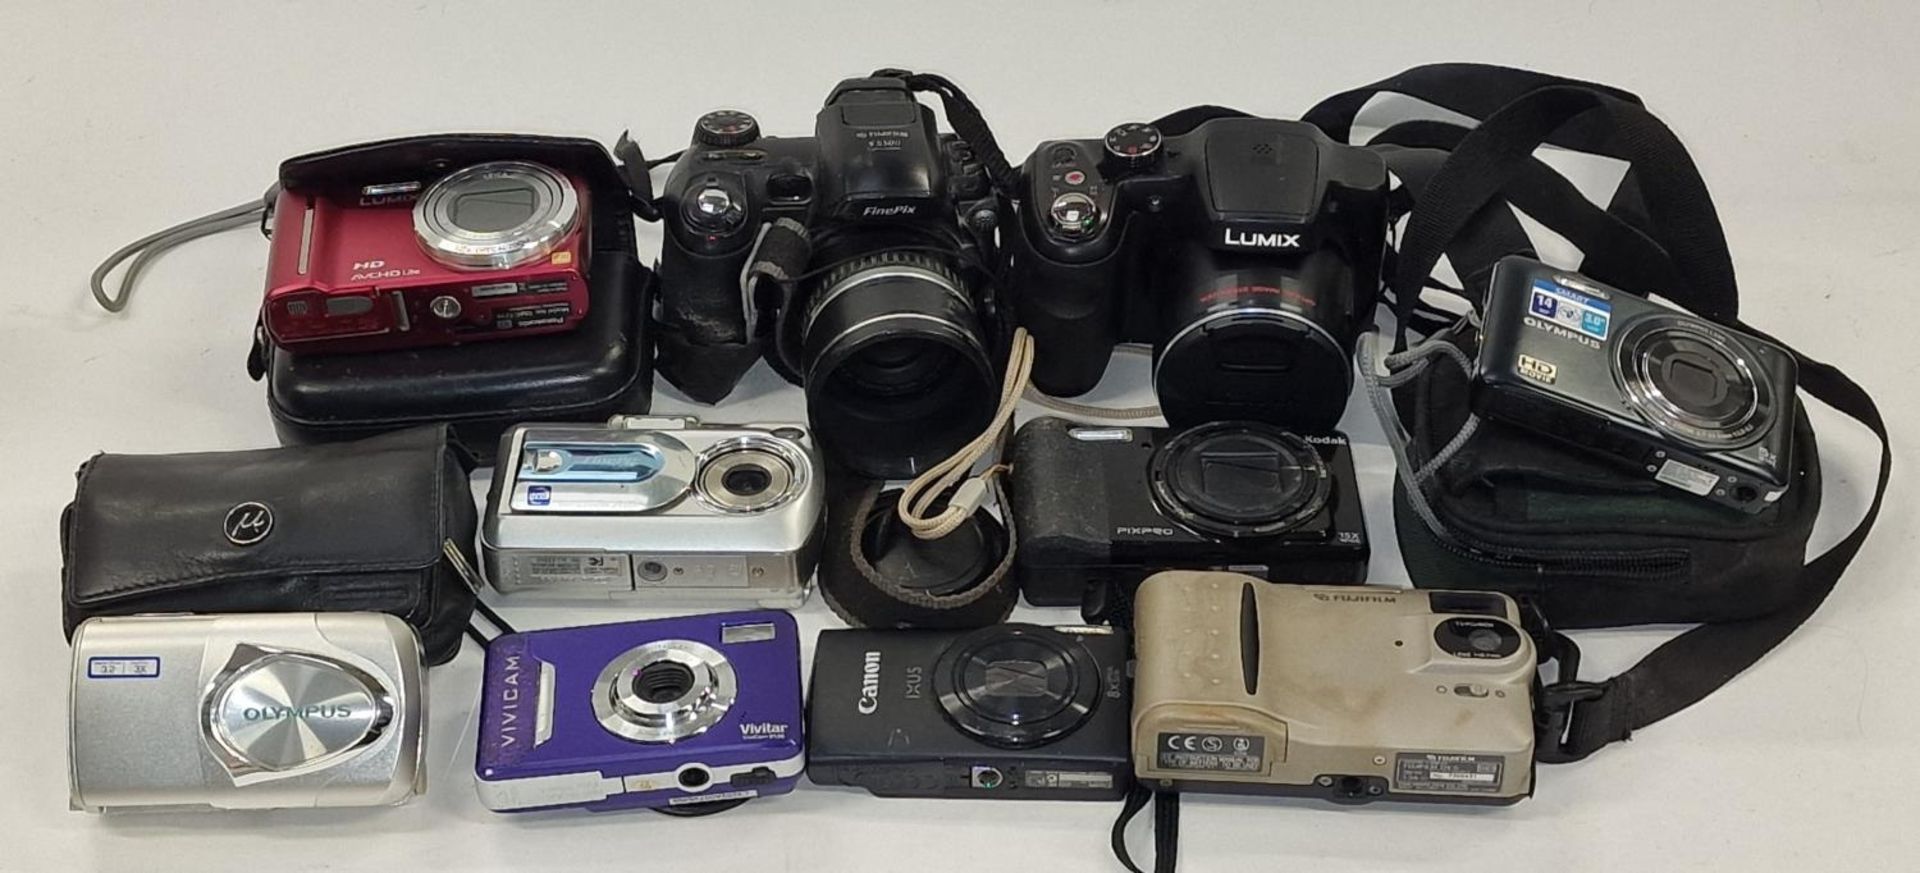 Collection of digital cameras to include vintage and modern examples. Not tested.